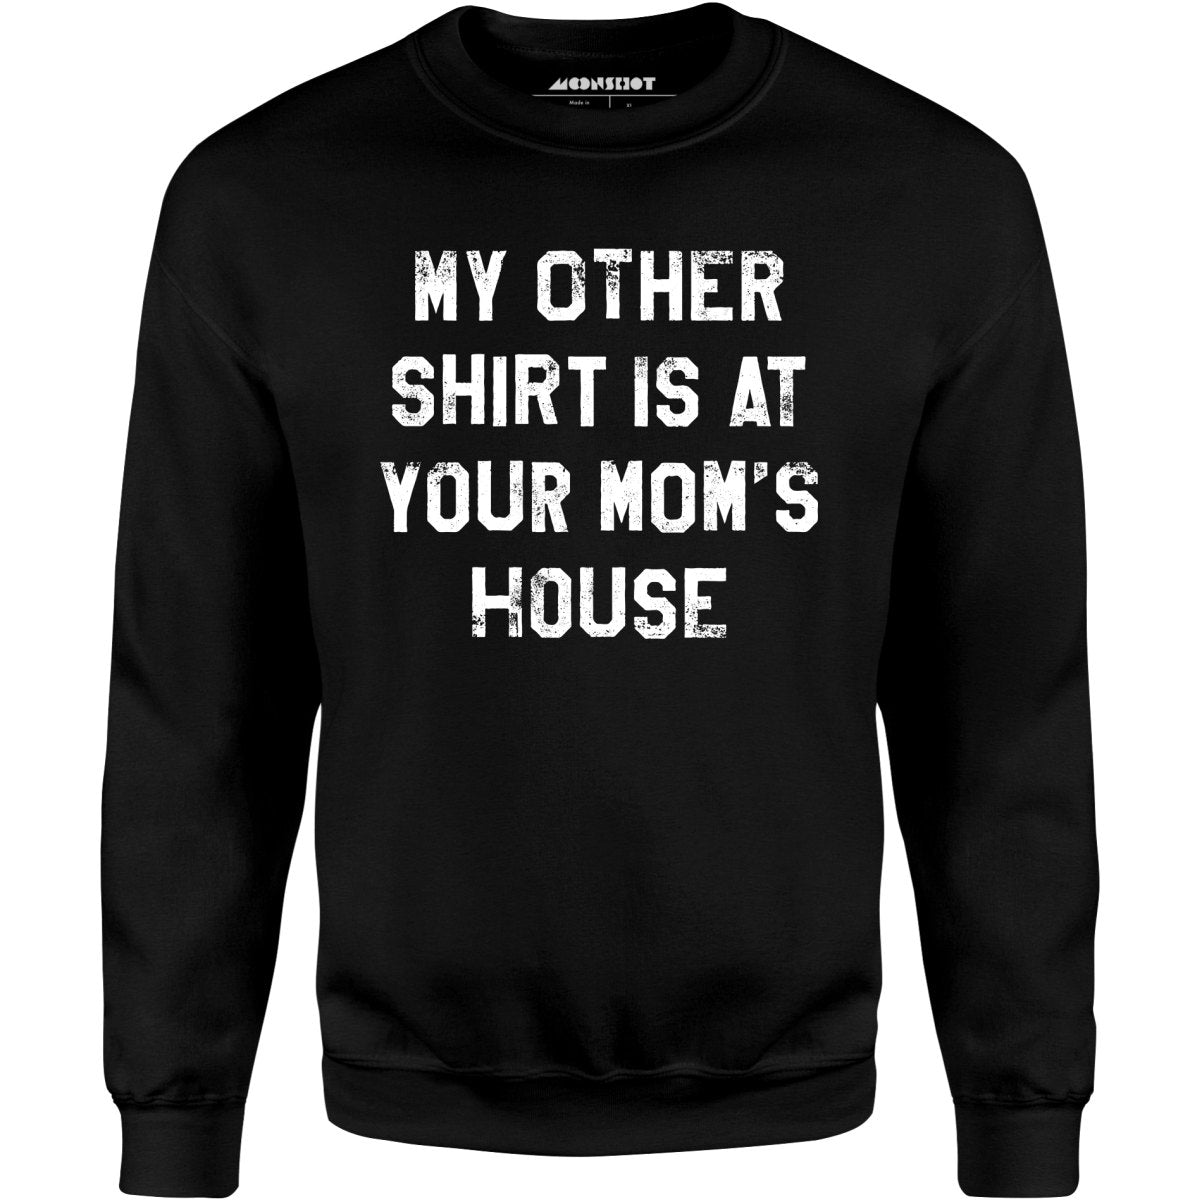 My Other Shirt Is At Your Mom's House - Unisex Sweatshirt